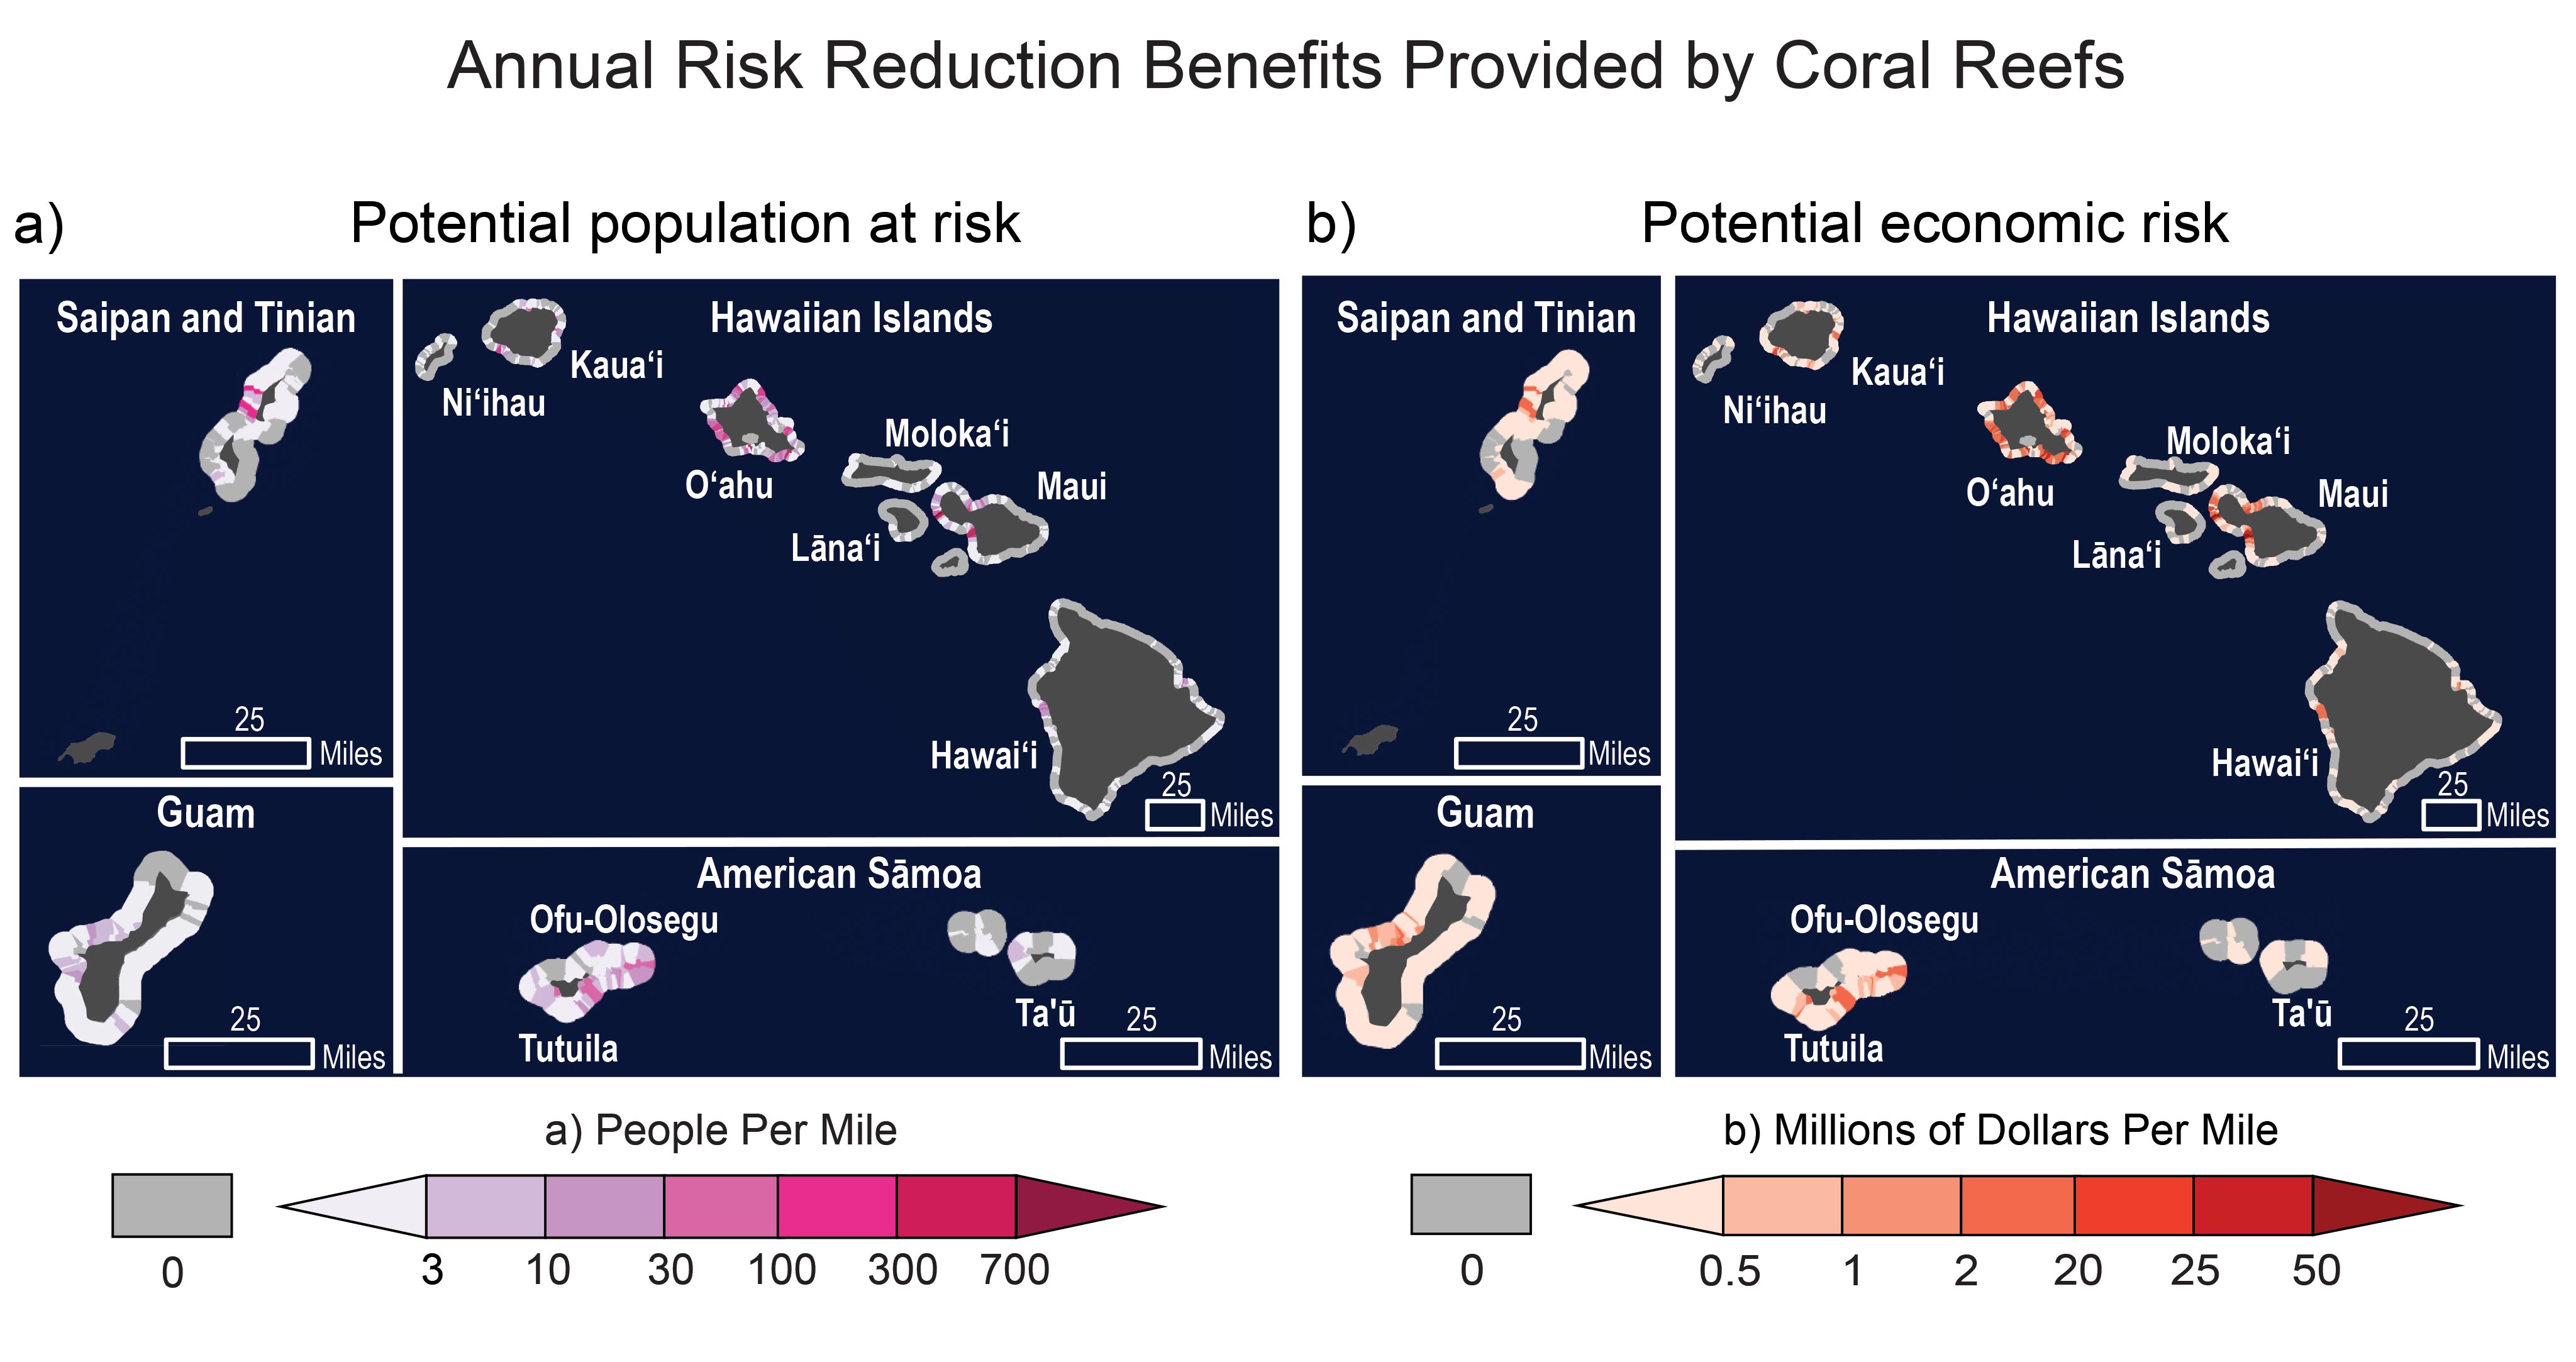 Annual Risk Reduction Benefits Provided by Coral Reefs